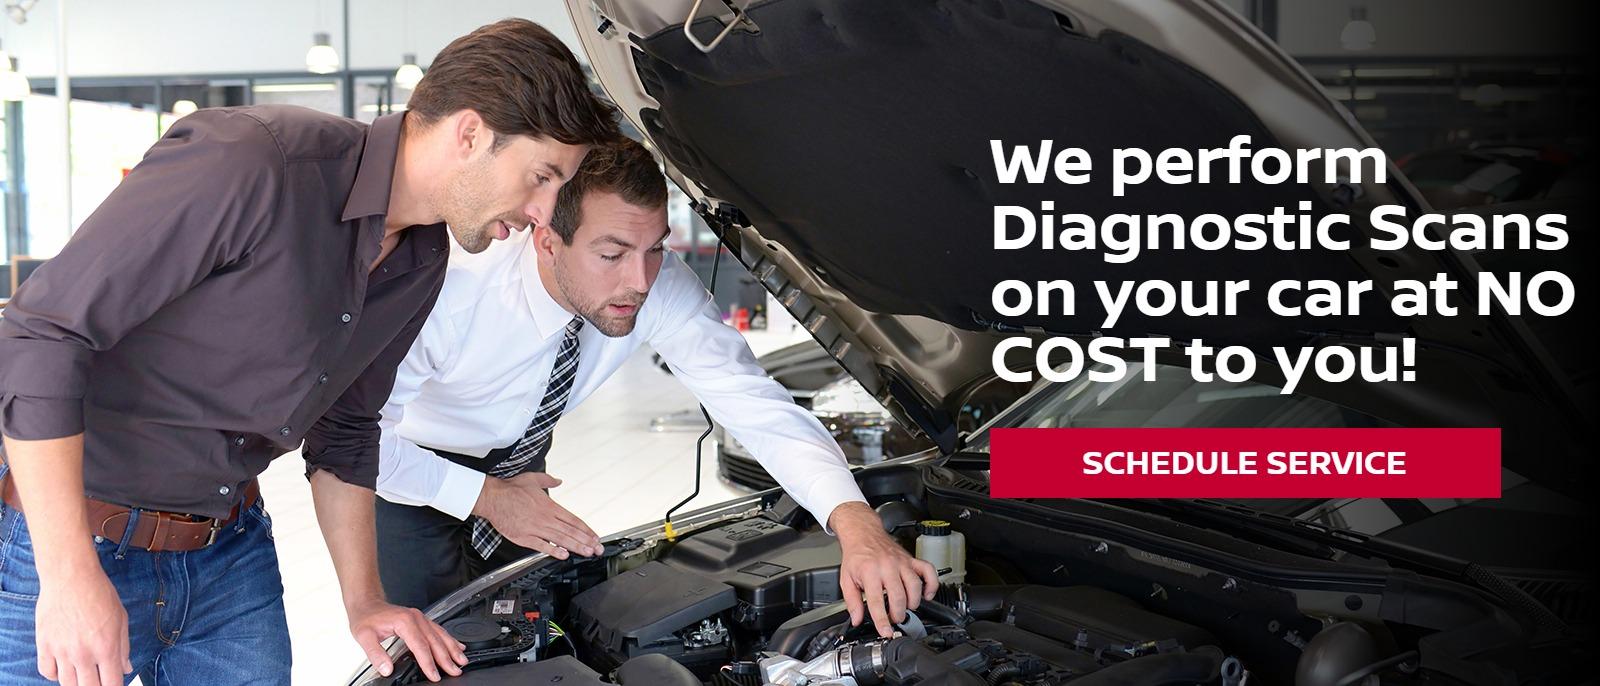 We perform Diagnostic Scans on your car at NO COST to you!